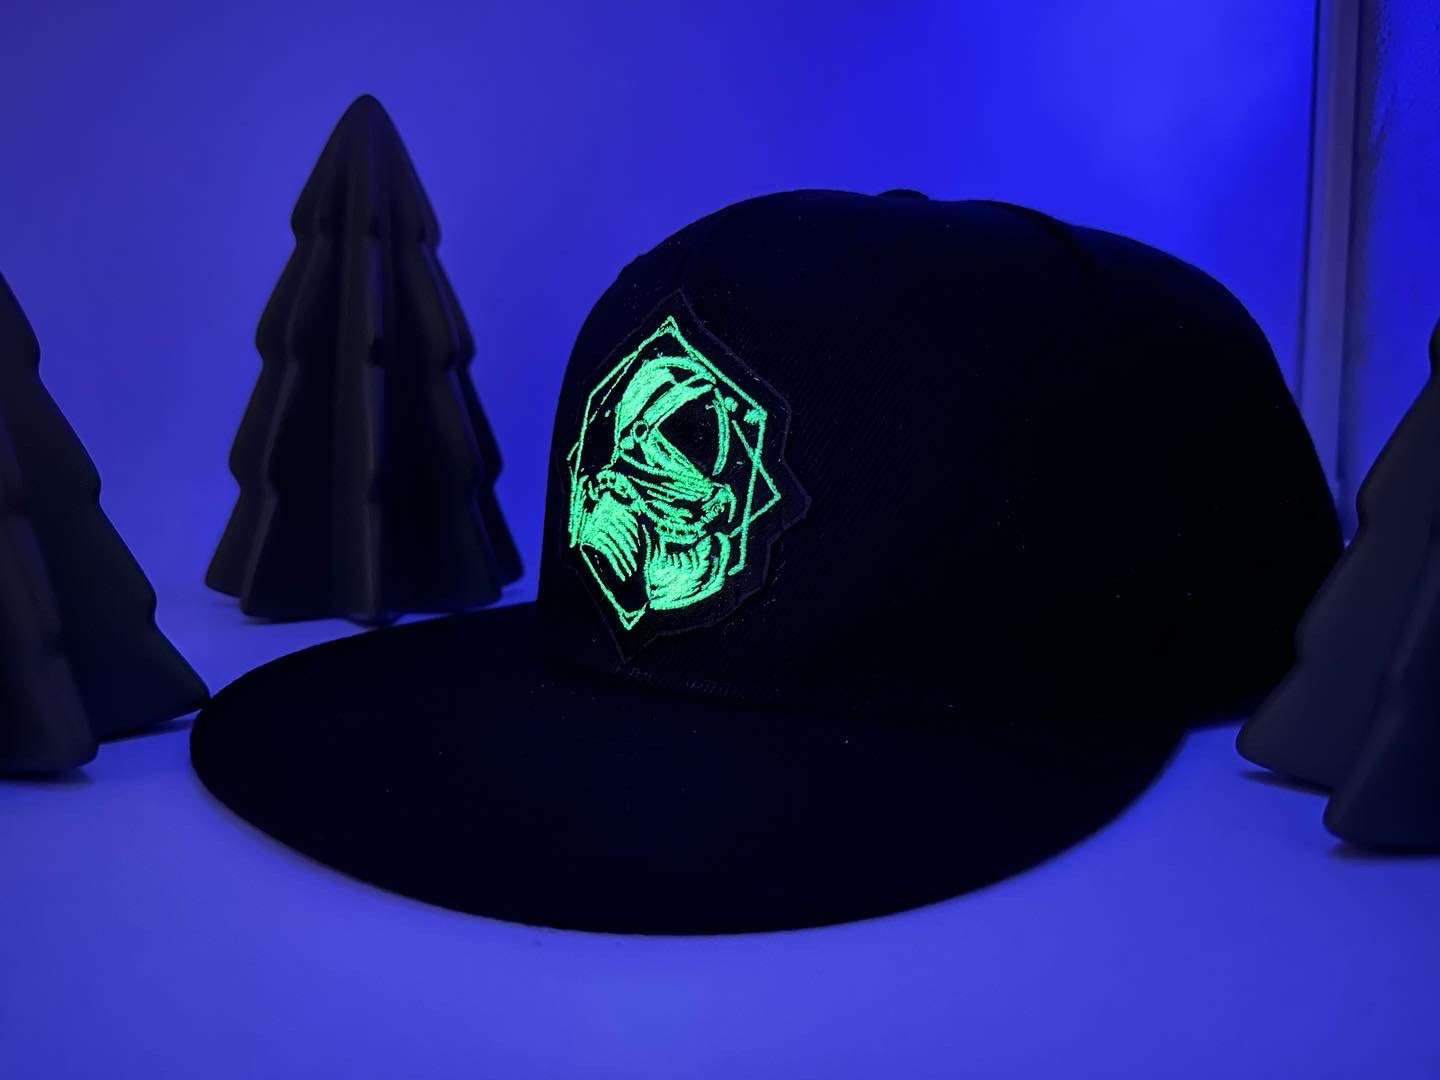 Custom Hats from Your Design